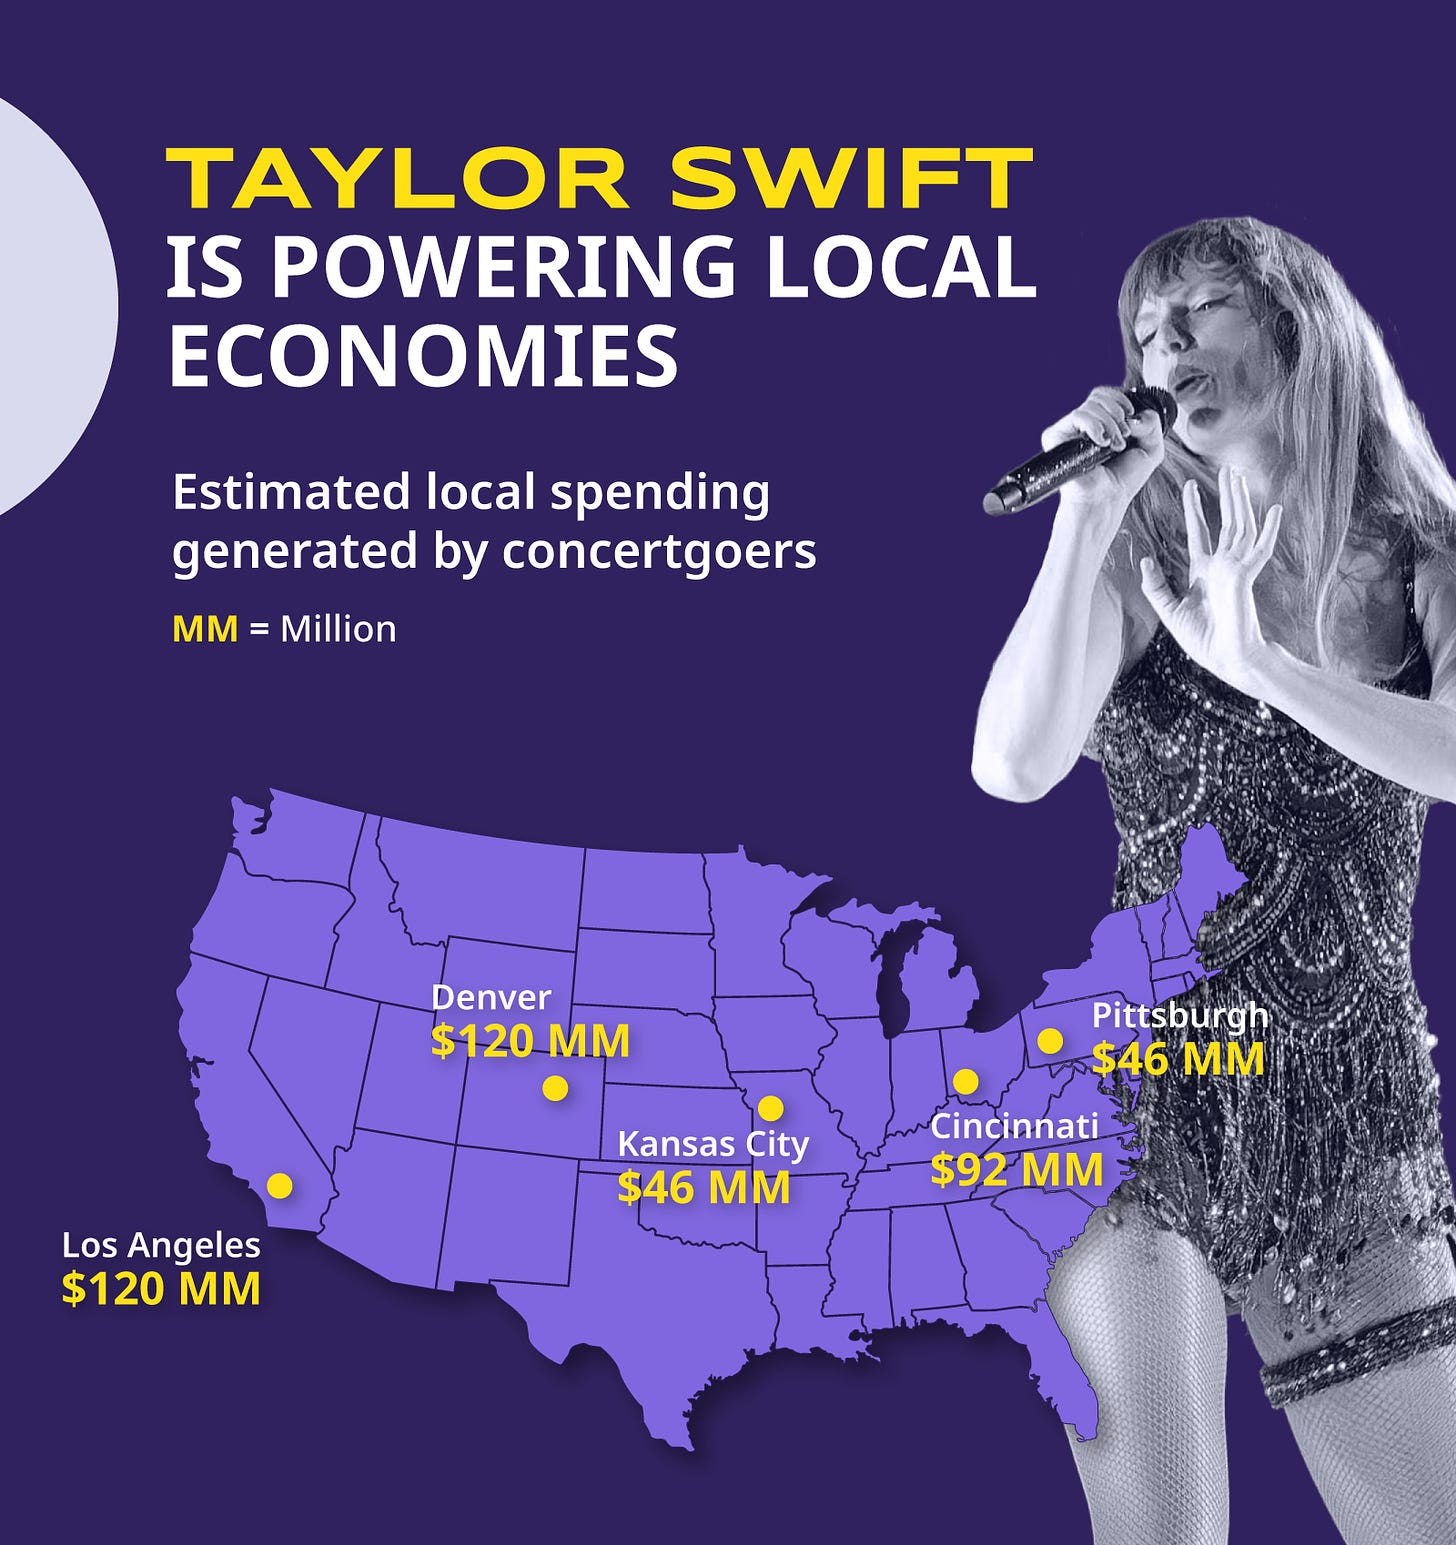 Graphic with text "Taylor Swift is powering local economies." The graphic shows a map of the U.S. with estimated local spending generated by concertgoers in five cities